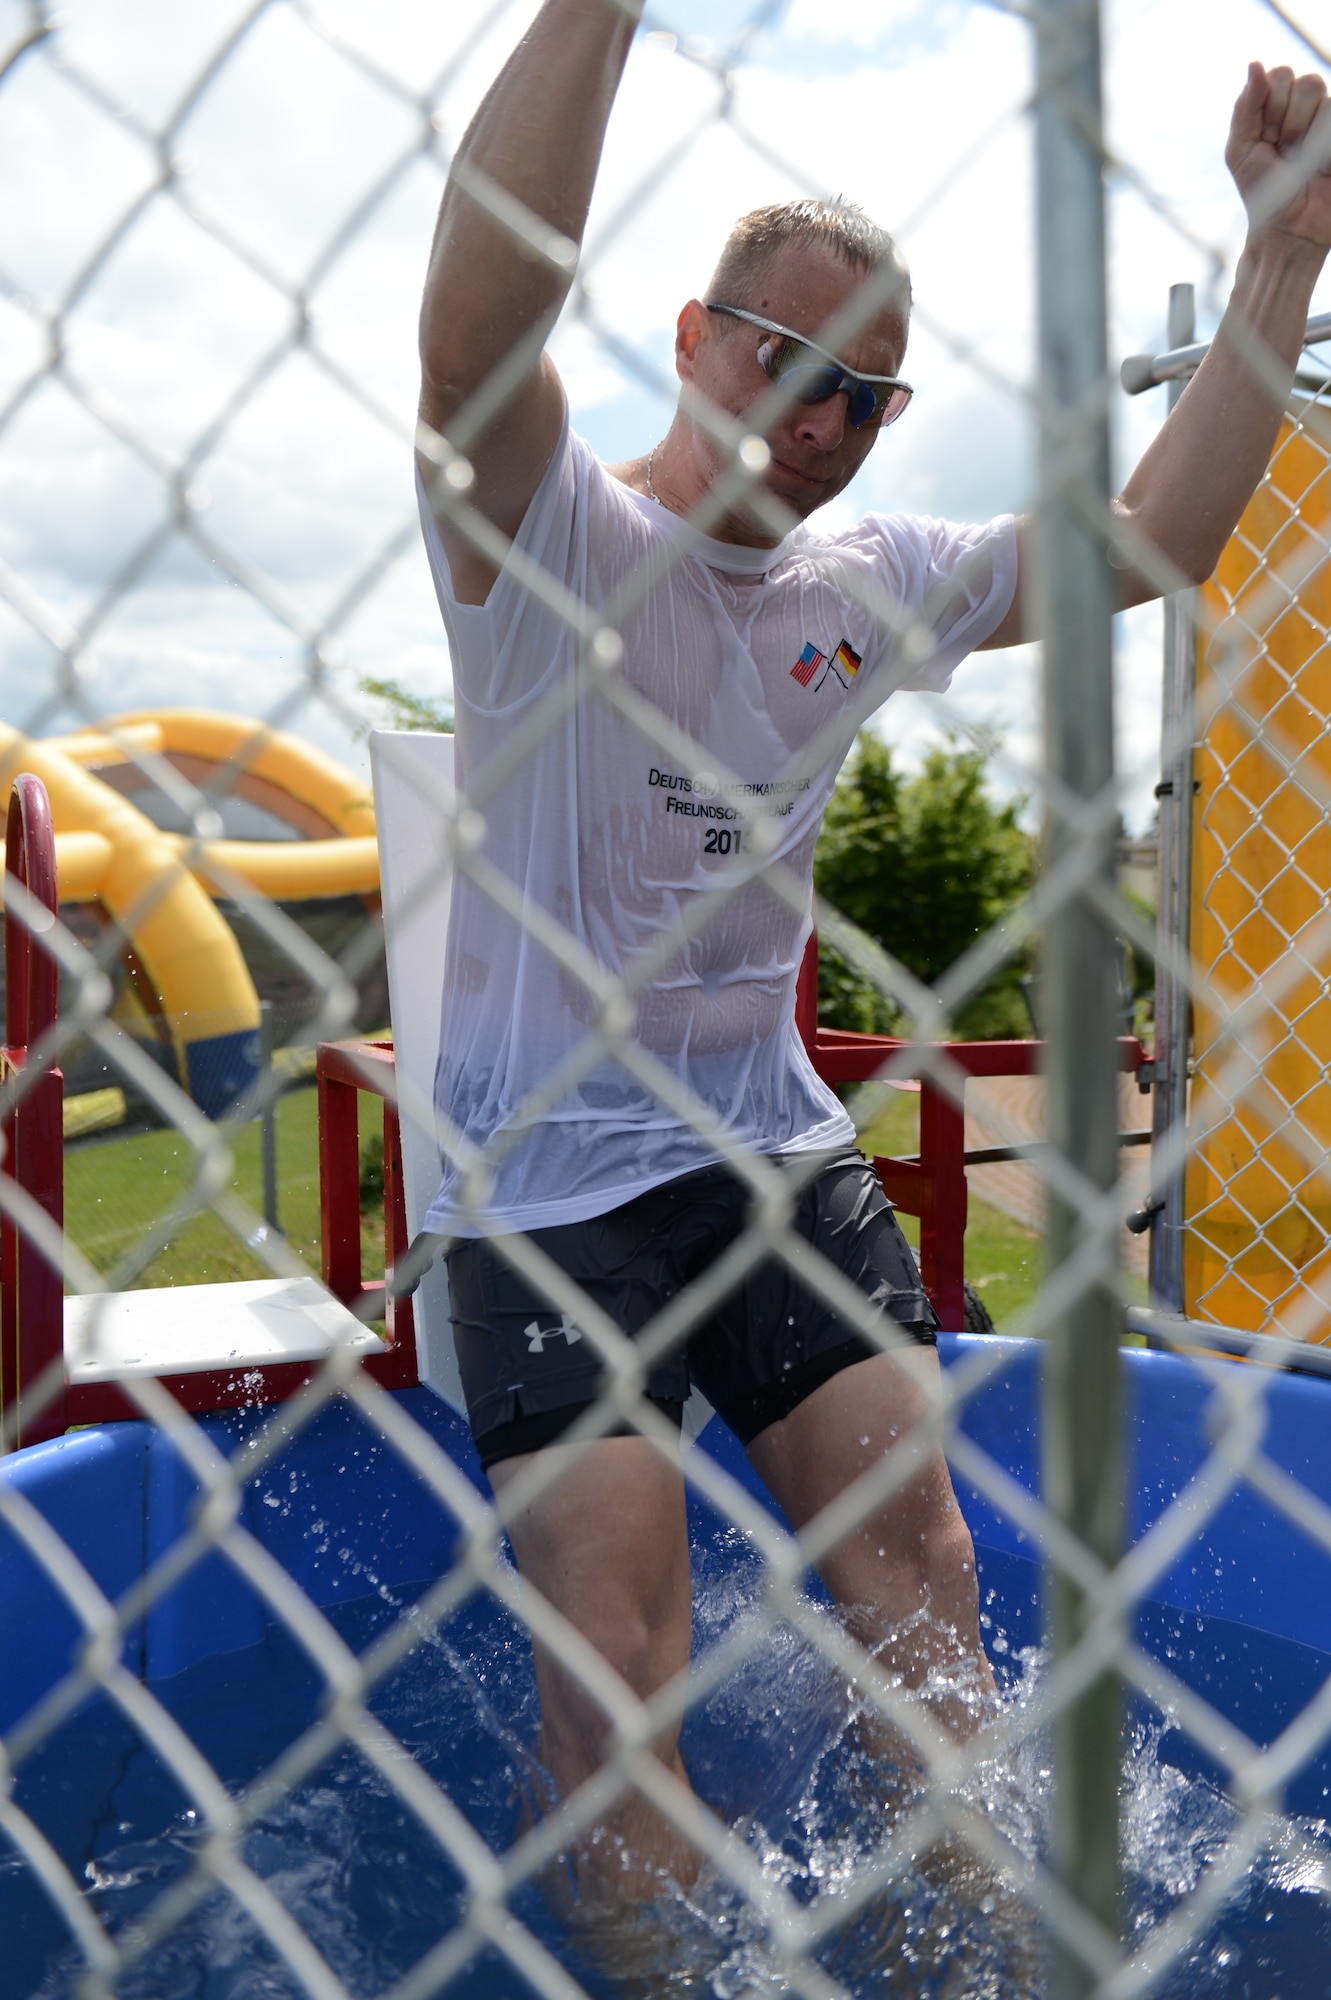 SPANGDAHLEM AIR BASE, Germany – U.S. Air Force Chief Master Sgt. Matthew Grengs, 52nd Fighter Wing command chief, mans the dunk tank during Super Saber Appreciation Day at the base pavilion near the Eifel Lanes Bowling Center July 4, 2013. The event included a number of activities including pony rides, a carousel and swings, and two bouncy castles. (U.S. Air Force photo by Airman 1st Class Gustavo Castillo/Released)